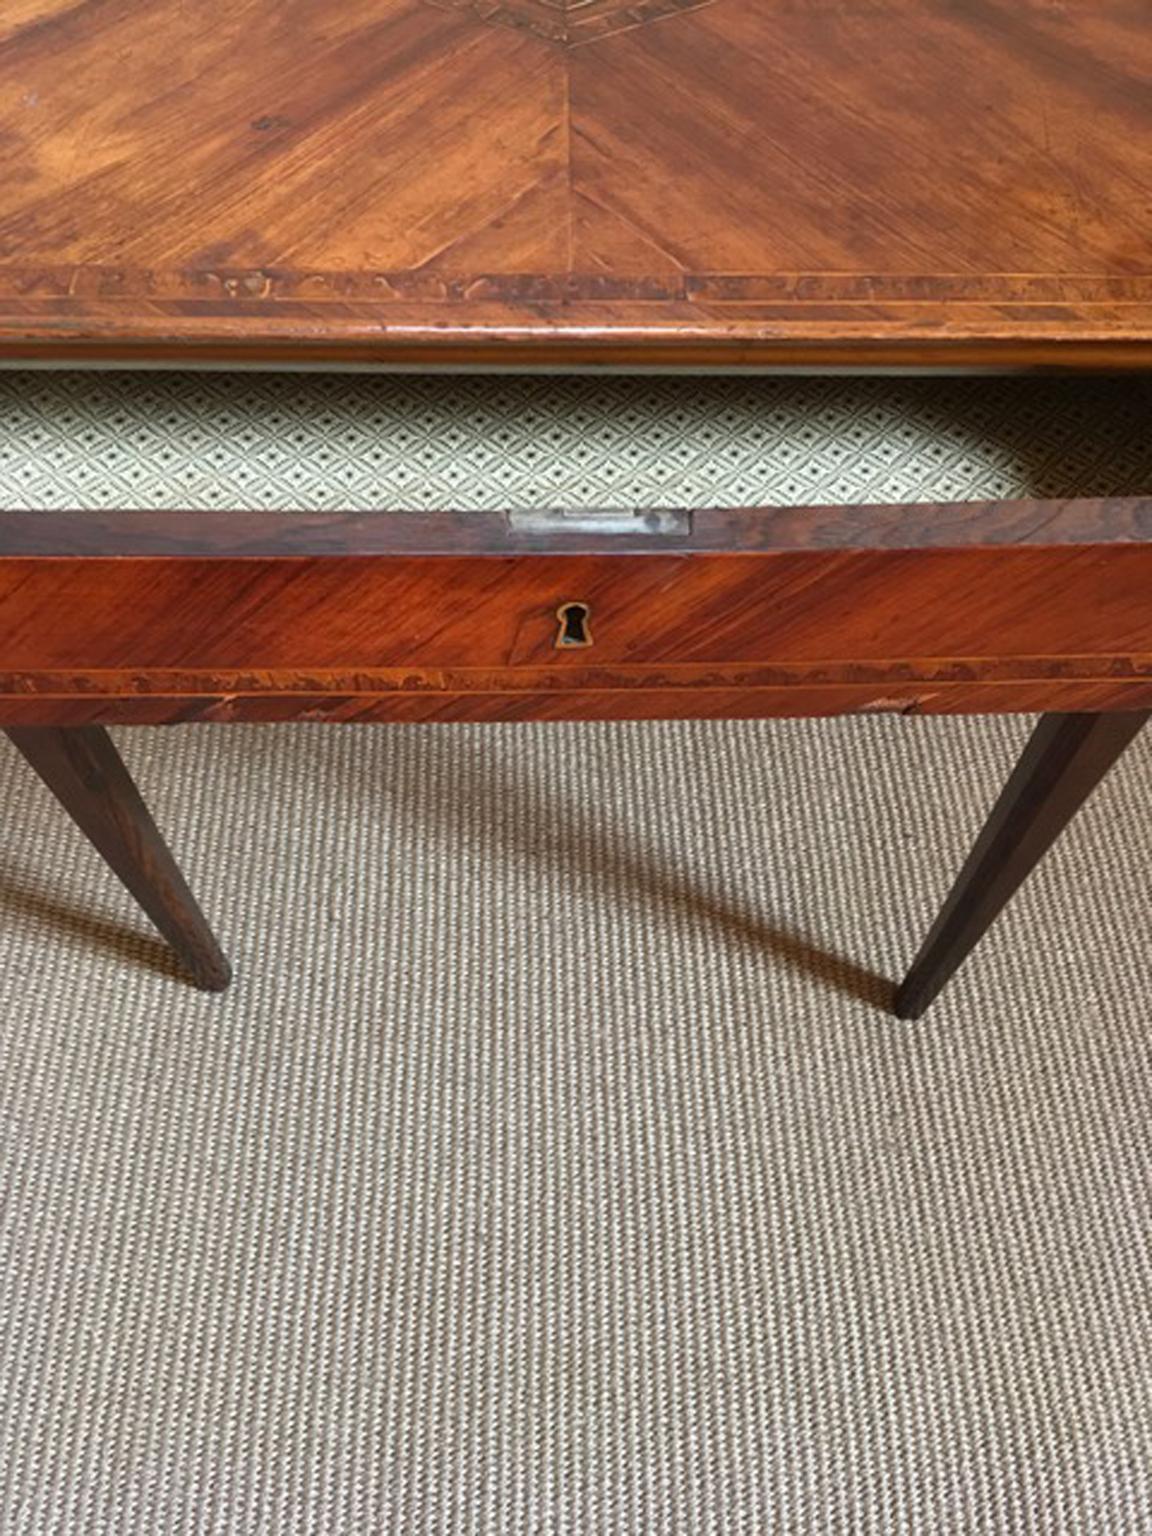 Regency Italy Mid-18th Century Walnut Inlaid Bedside or Side Table with Drawer For Sale